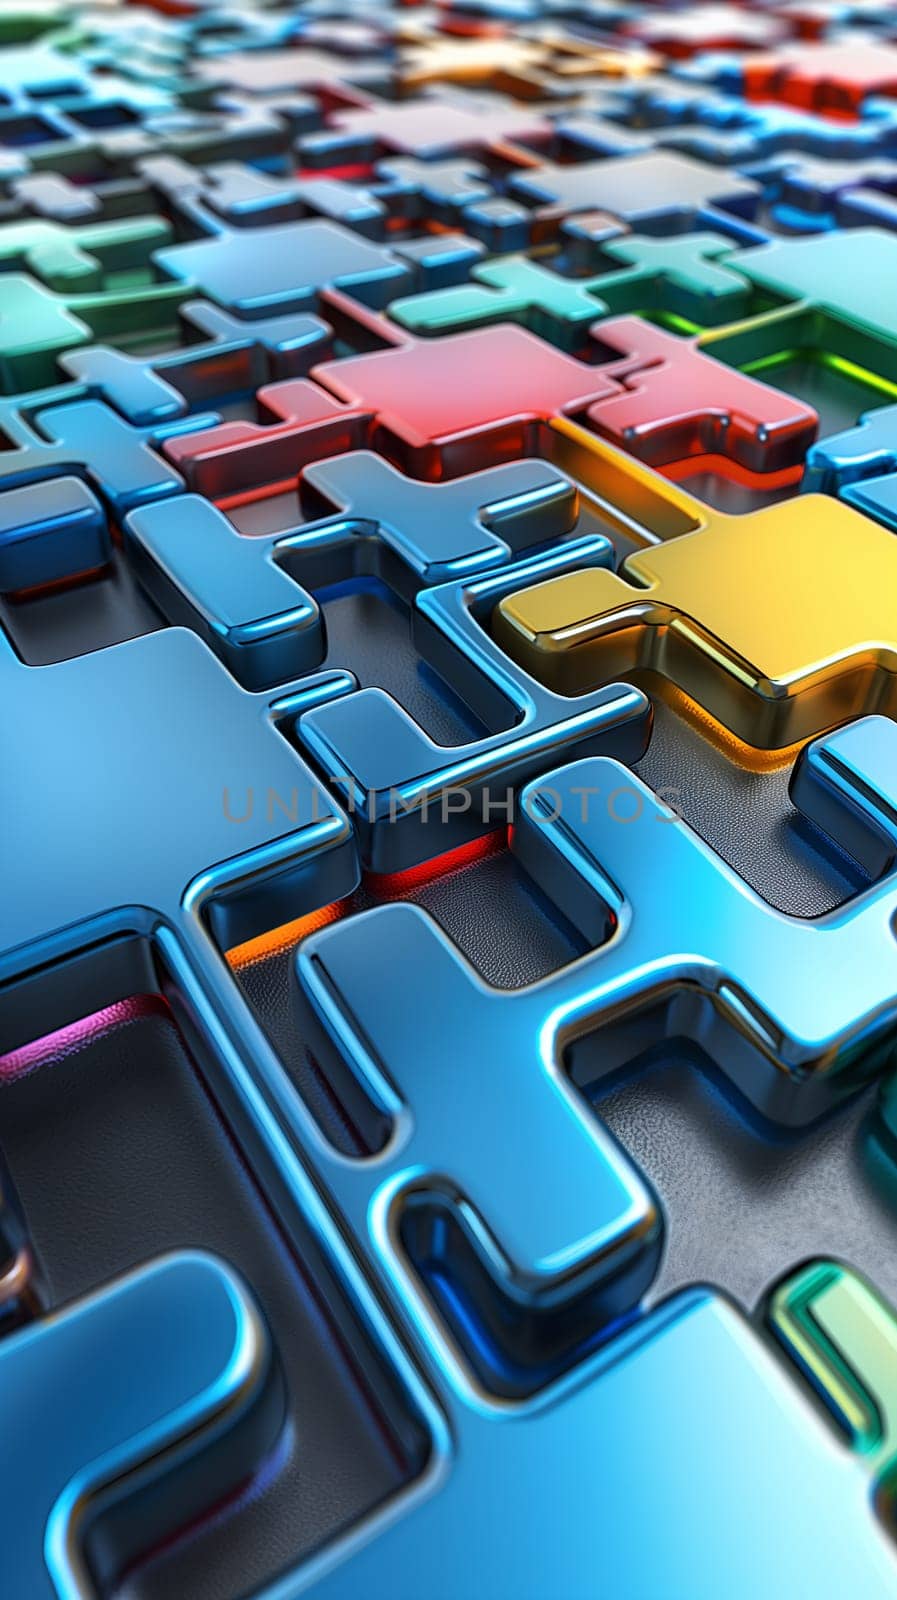 A close-up view captures the vibrant colors and shiny surfaces of 3D metallic structure spread across a flat area, suggesting teamwork or complexity - Generative AI